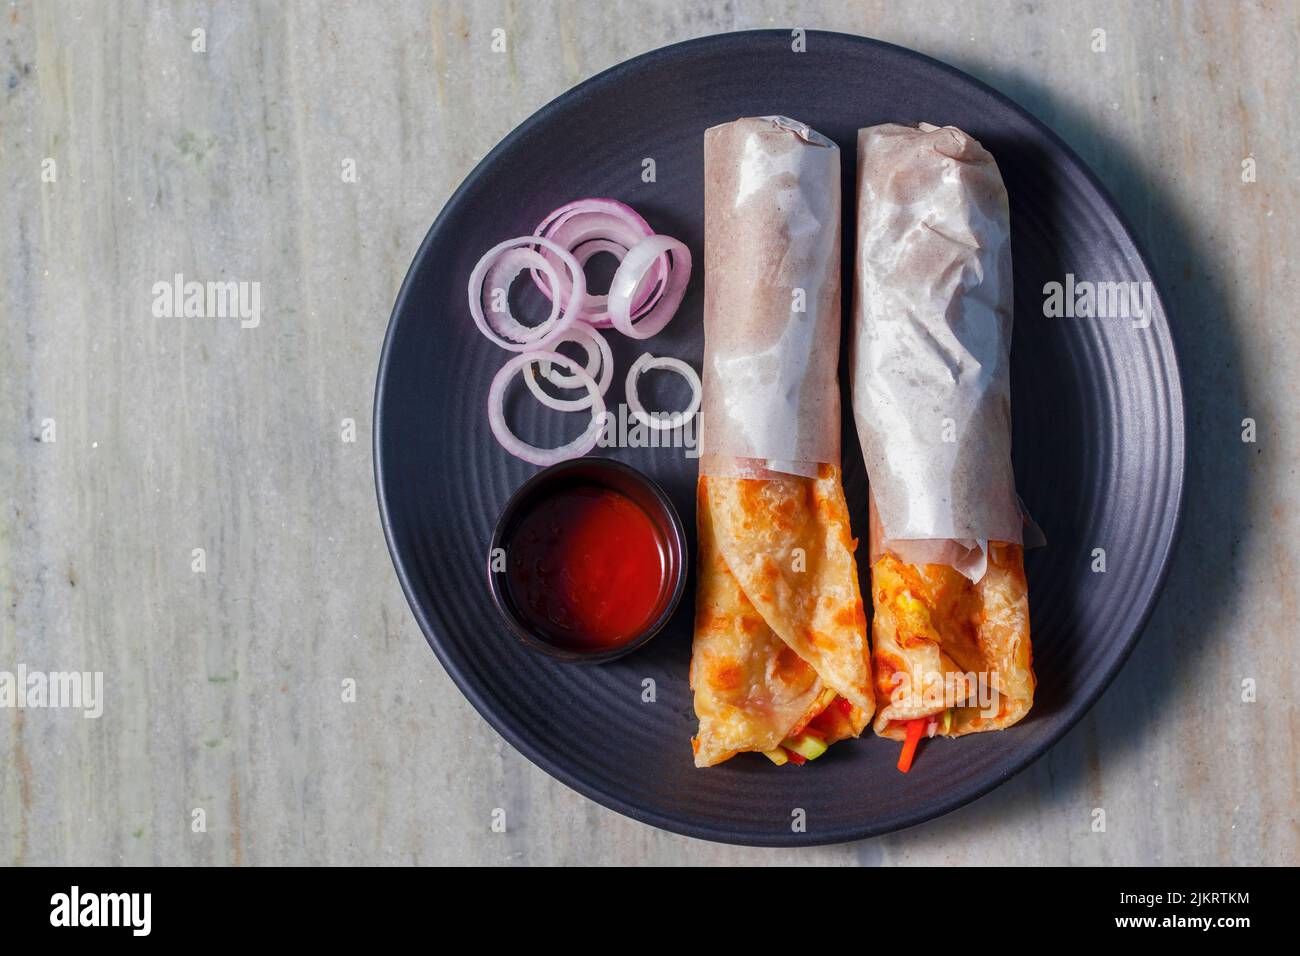 delicious Indian street food 'egg rolls' is ready to eat. Stock Photo